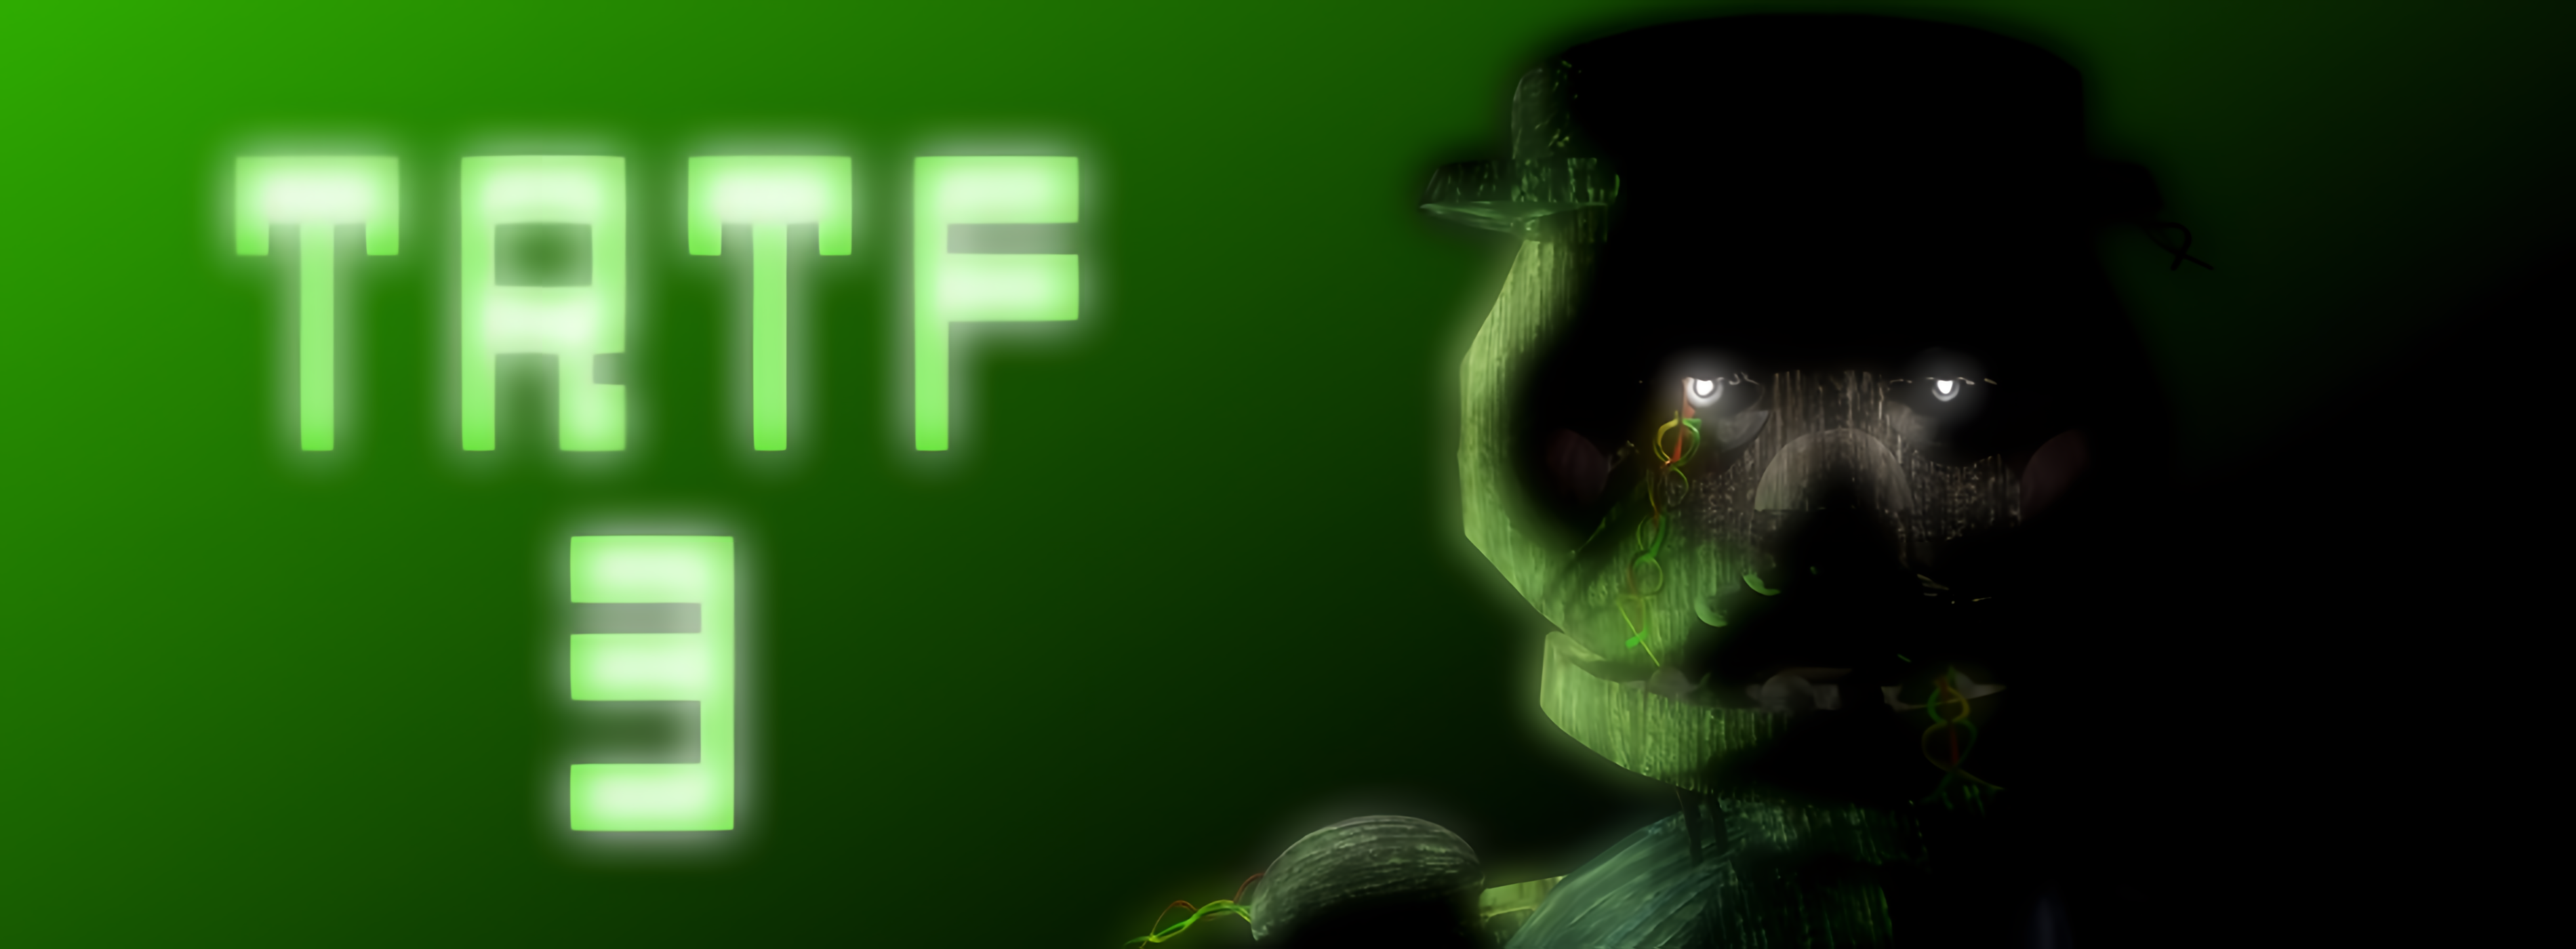 Five Nights at Freddy's: Revised (v1.0.2) file - ModDB